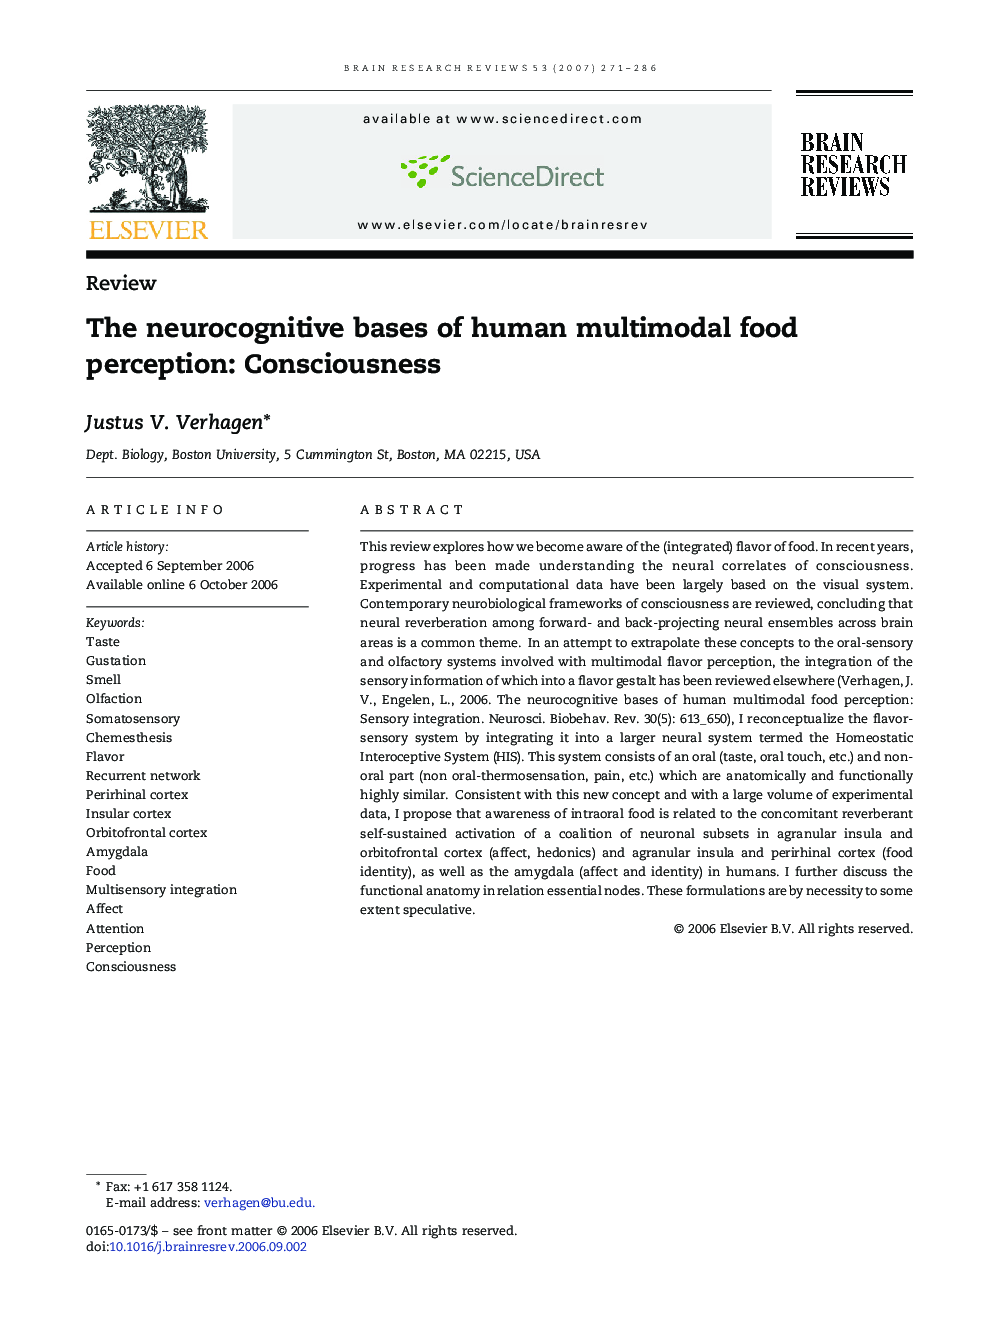 The neurocognitive bases of human multimodal food perception: Consciousness